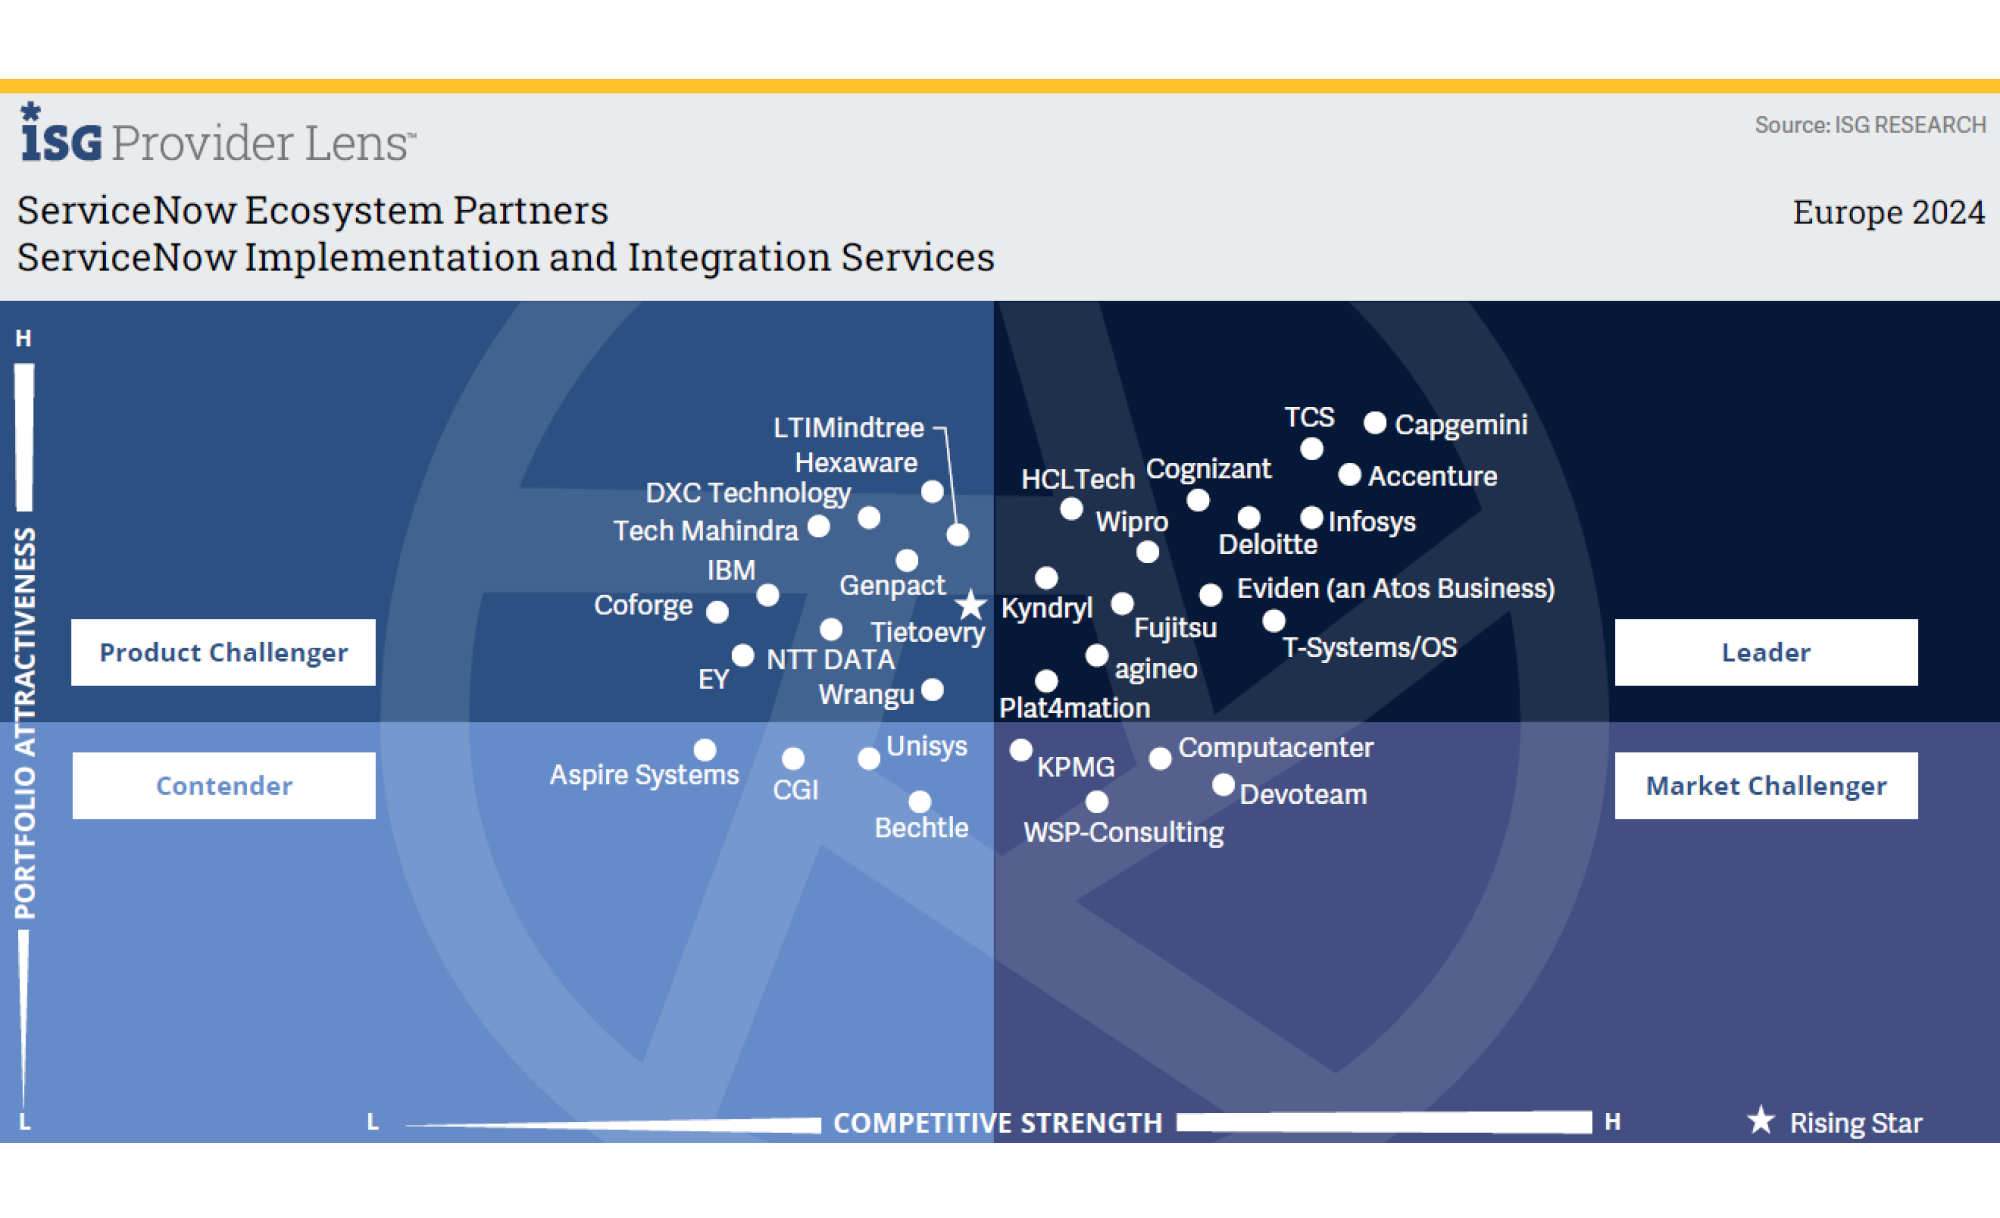 This quadrant assesses service providers’ consulting capabilities in guiding the adoption of emerging technologies available on the ServiceNow platform. These new technologies drive innovation in business solutions and industry verticals.